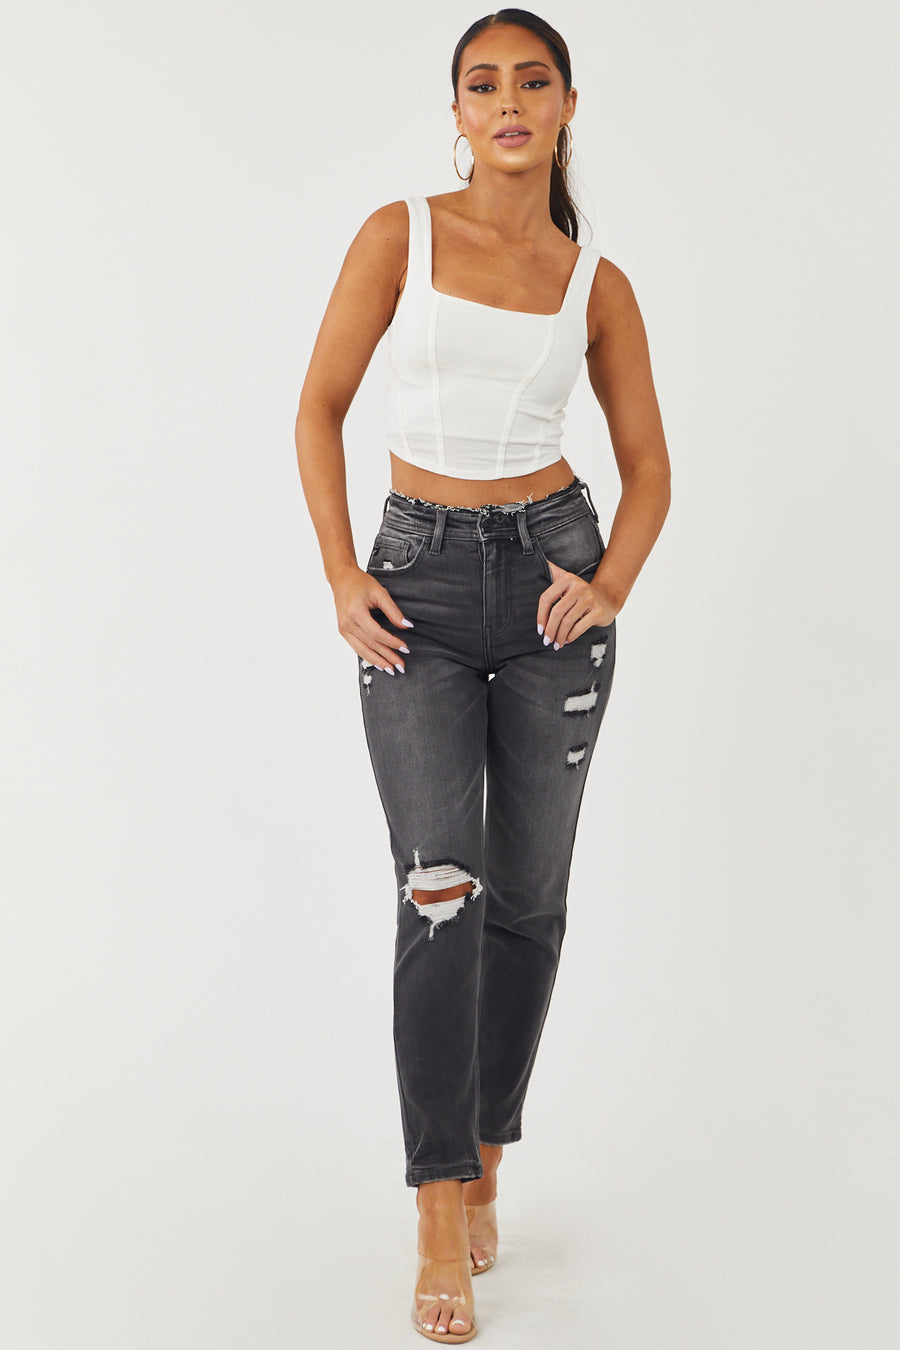 Charcoal Wash Distressed High Rise Jeans